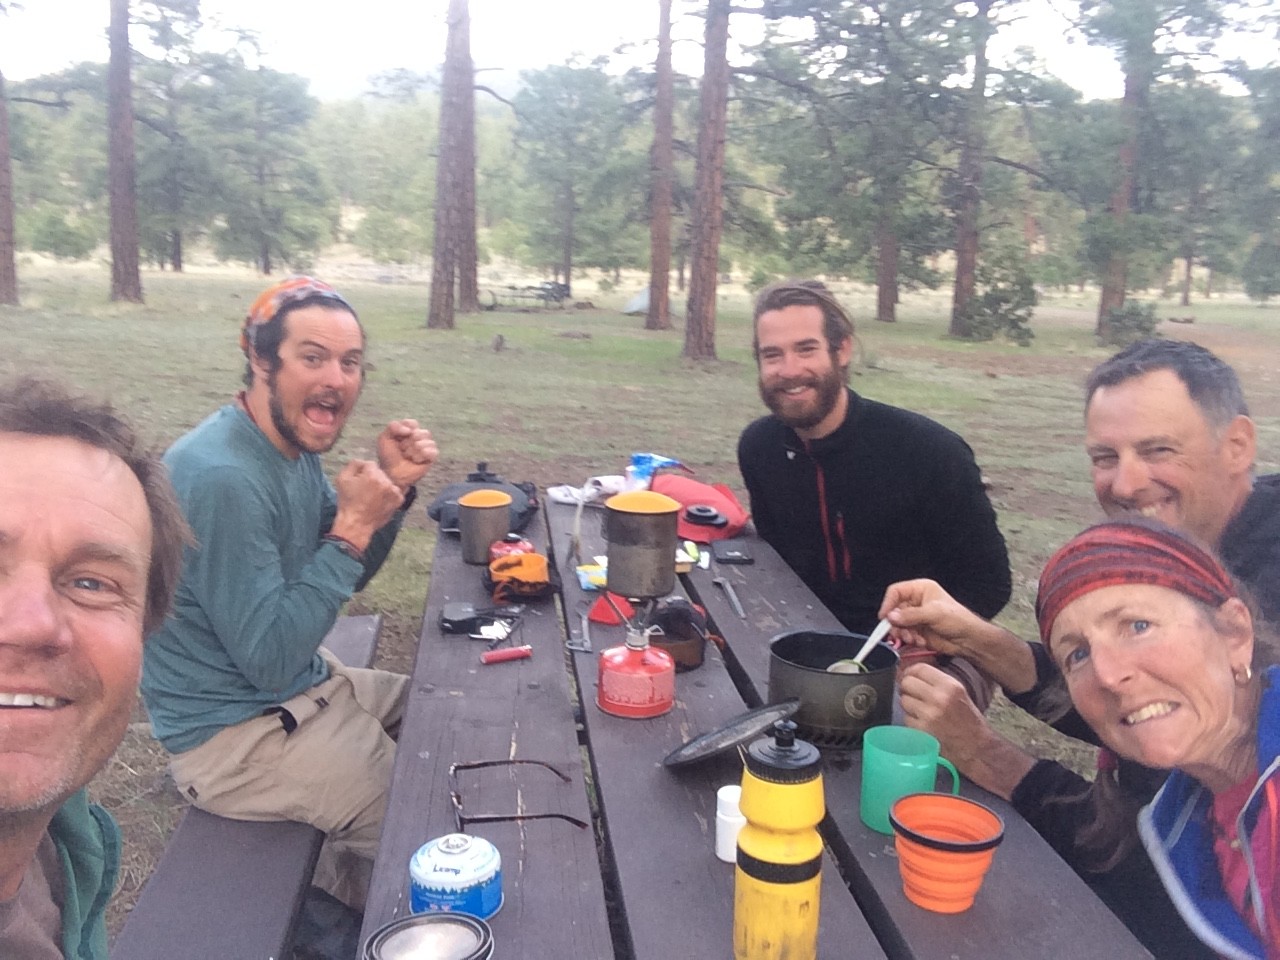 Rob, Brian and Alex, and us enjoying dinner at our last camp before Pie Town